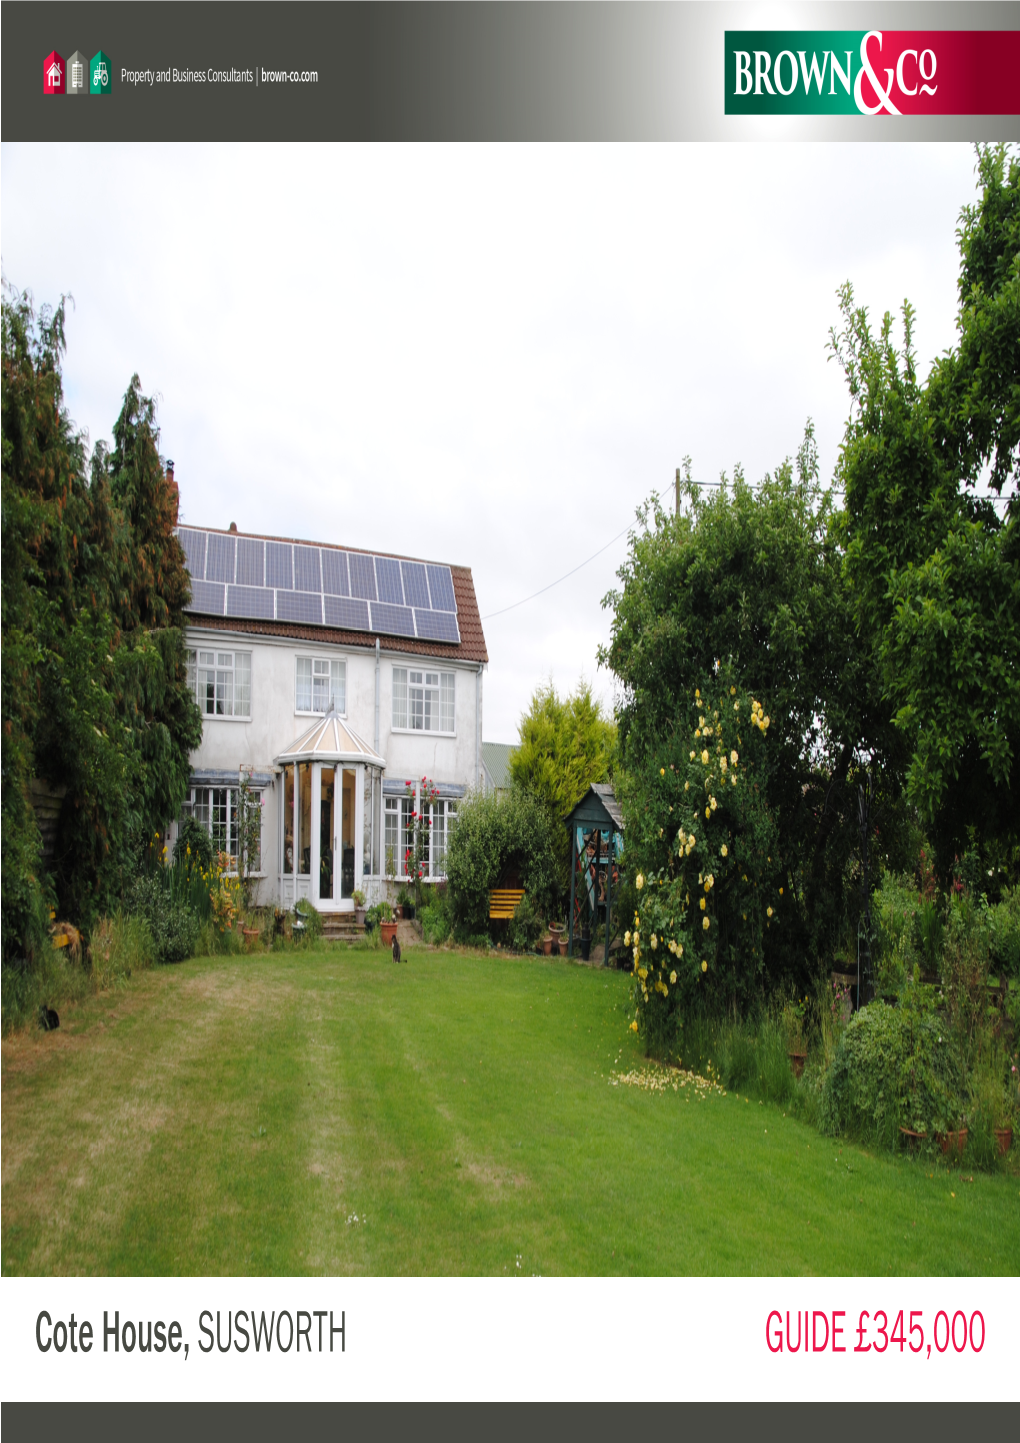 GUIDE £345,000 Cote House, SUSWORTH